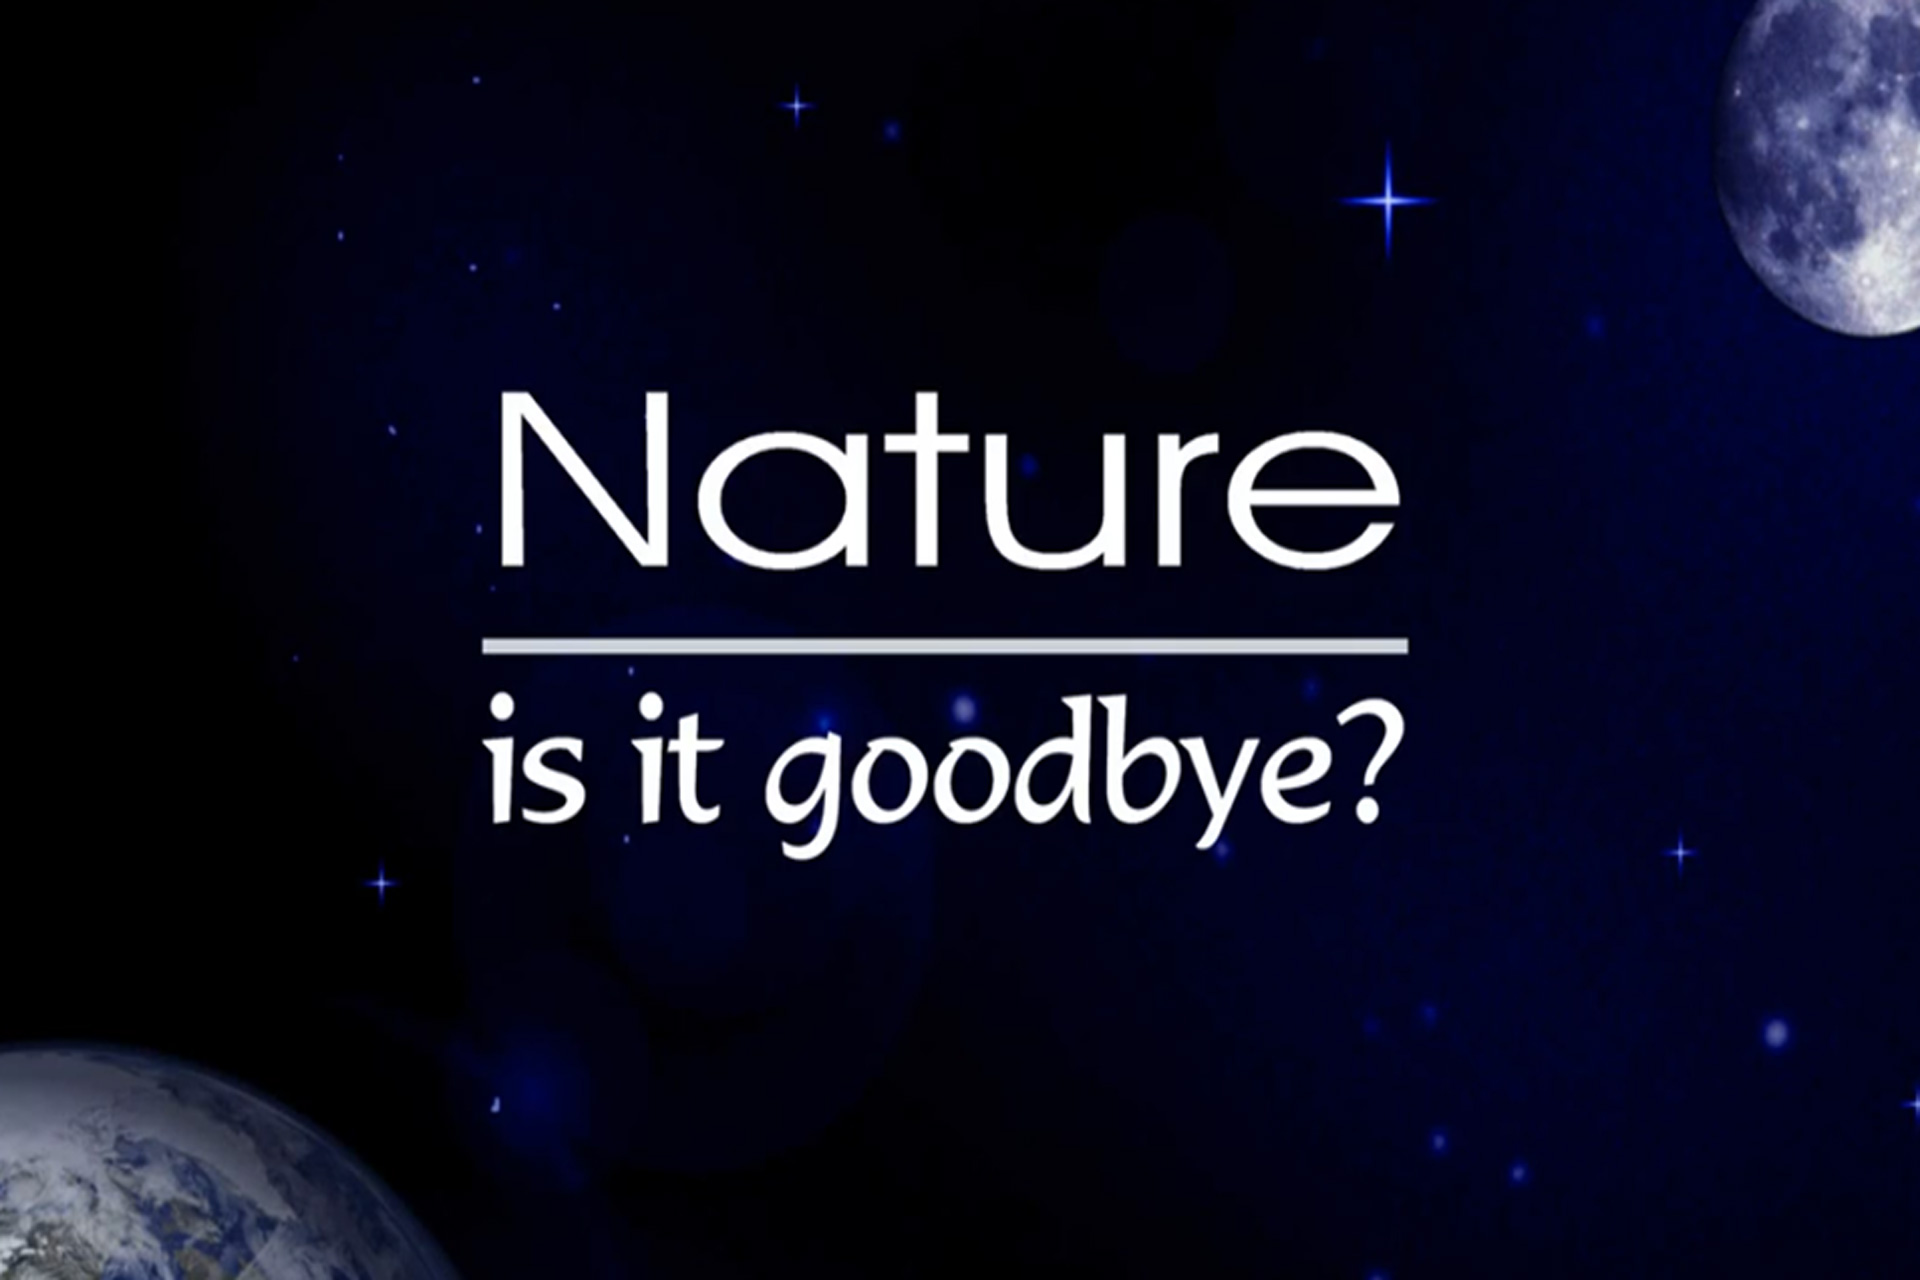 Nature, is it goodbye?